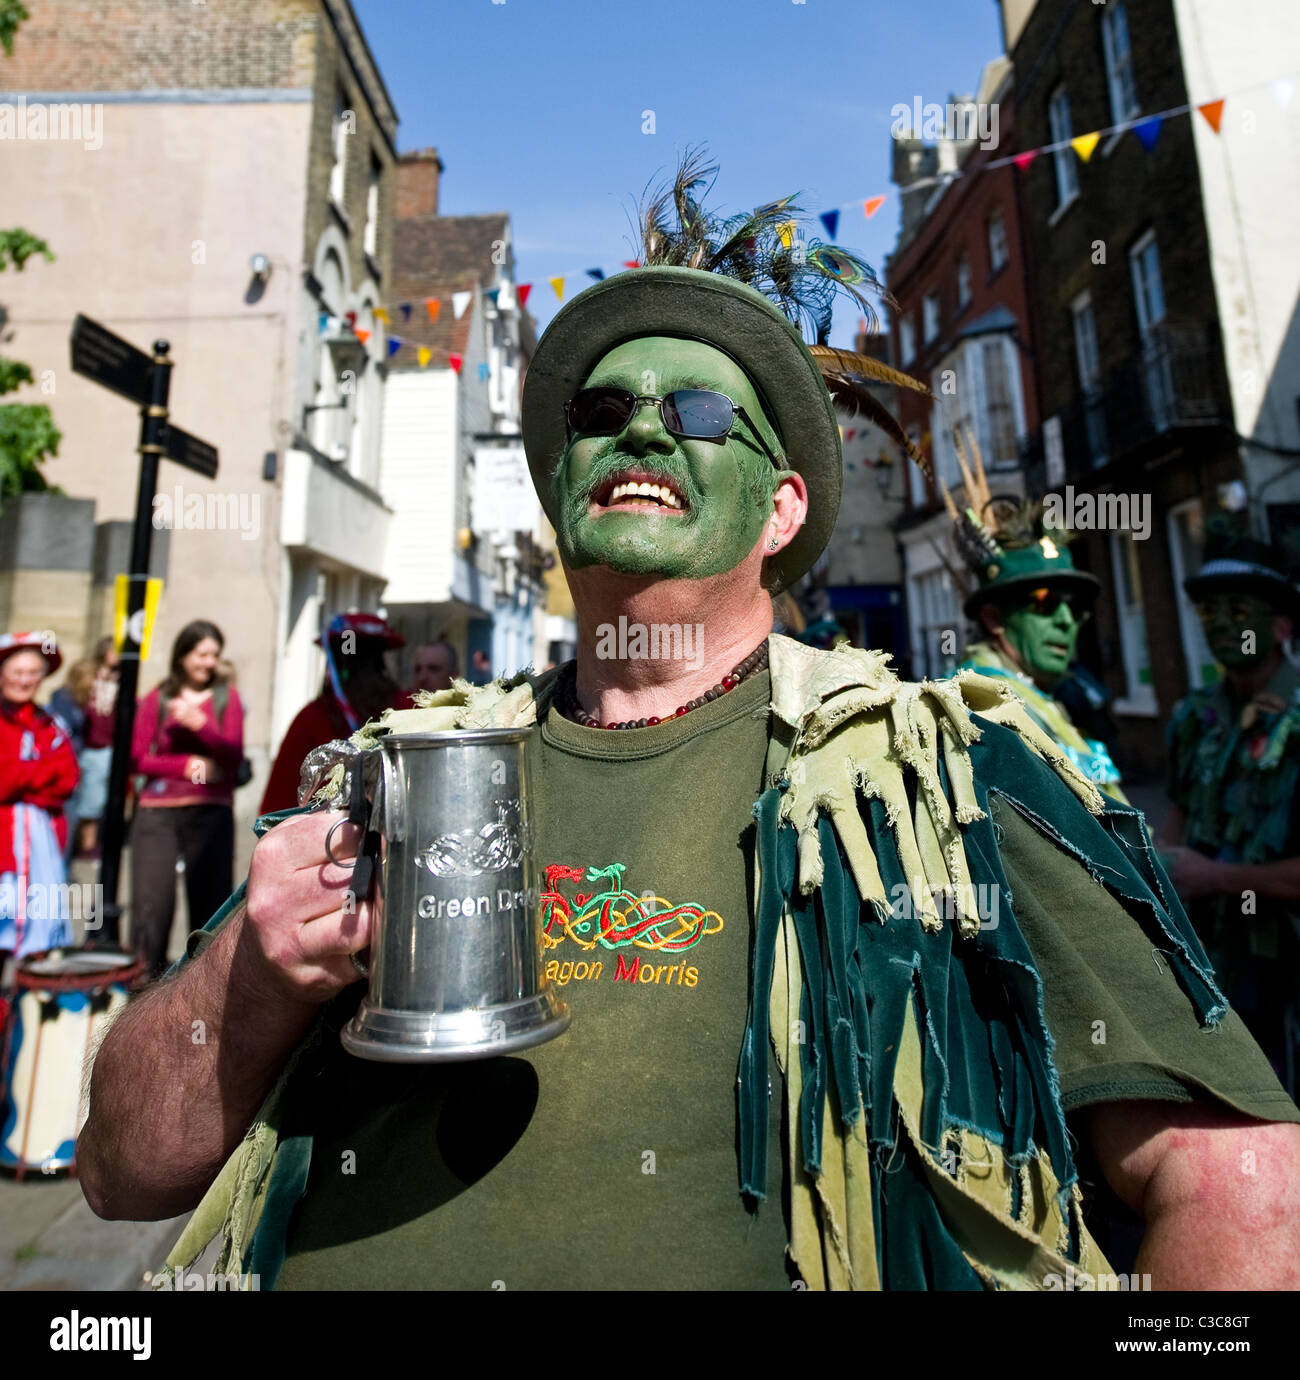 A morris dancer from Green Dragon Morris at the Sweeps Festival Stock Photo